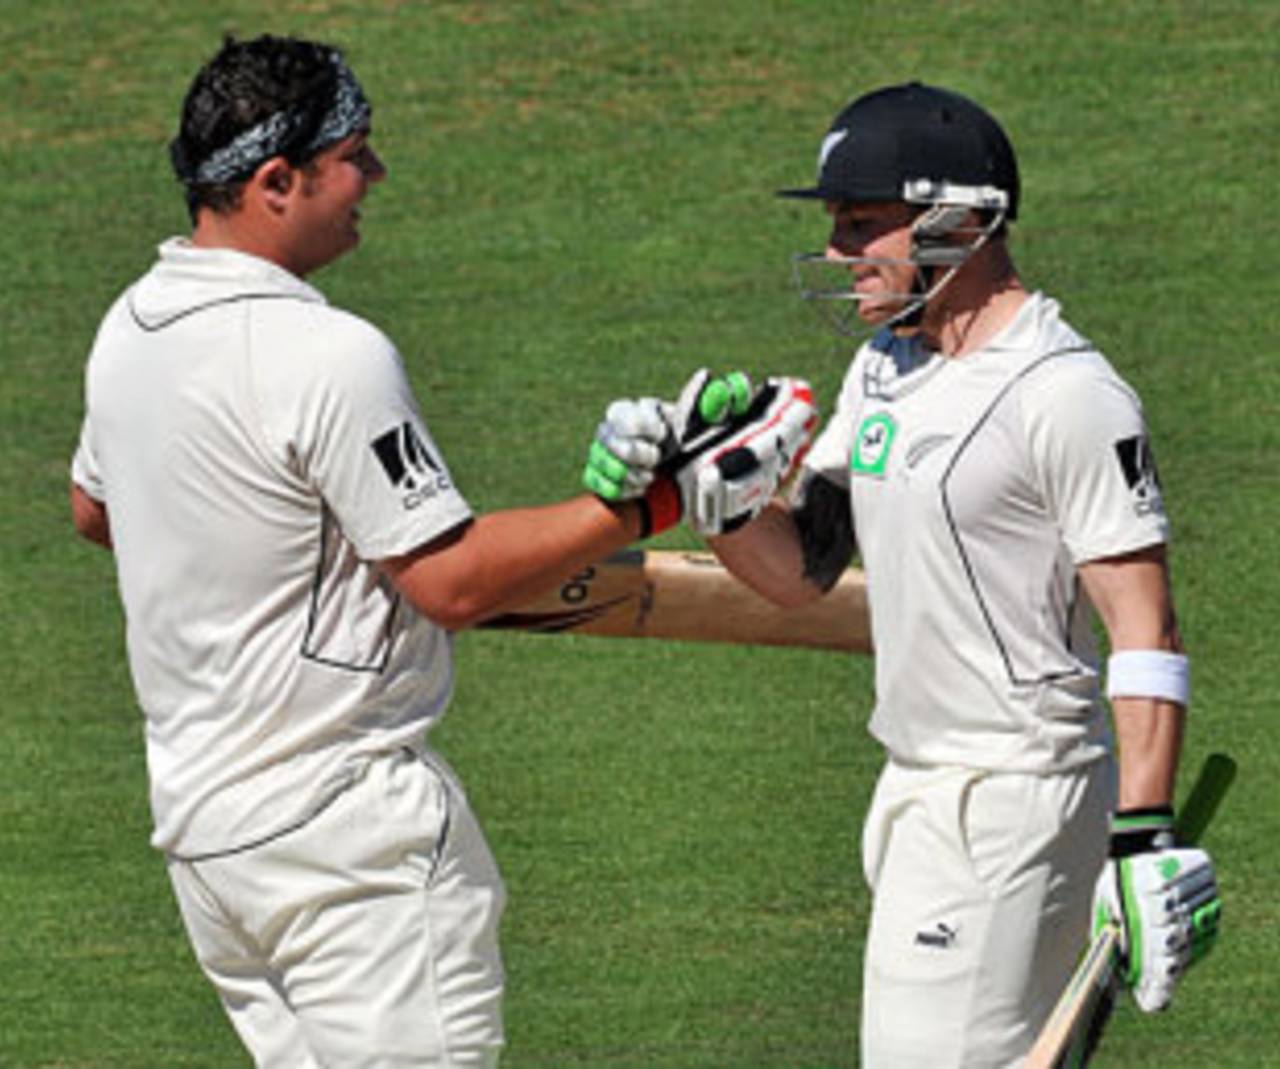 Brendon McCullum was around to congratulate Jesse Ryder, New Zealand v India, 2nd Test, Napier, 2nd day, March 27, 2009